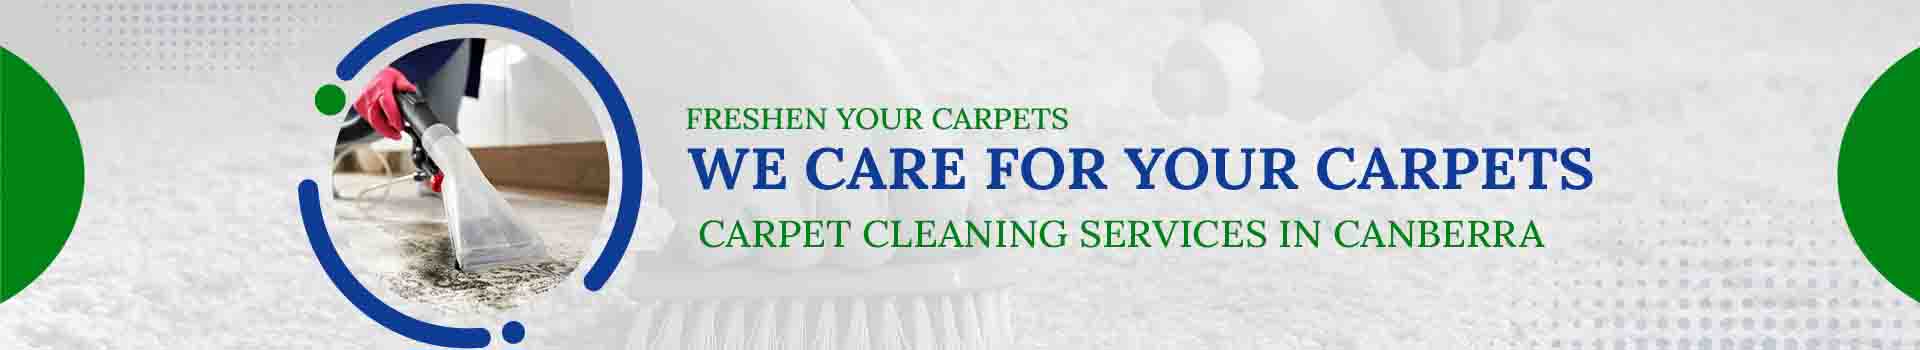 Carpet Cleaning services In Canberra